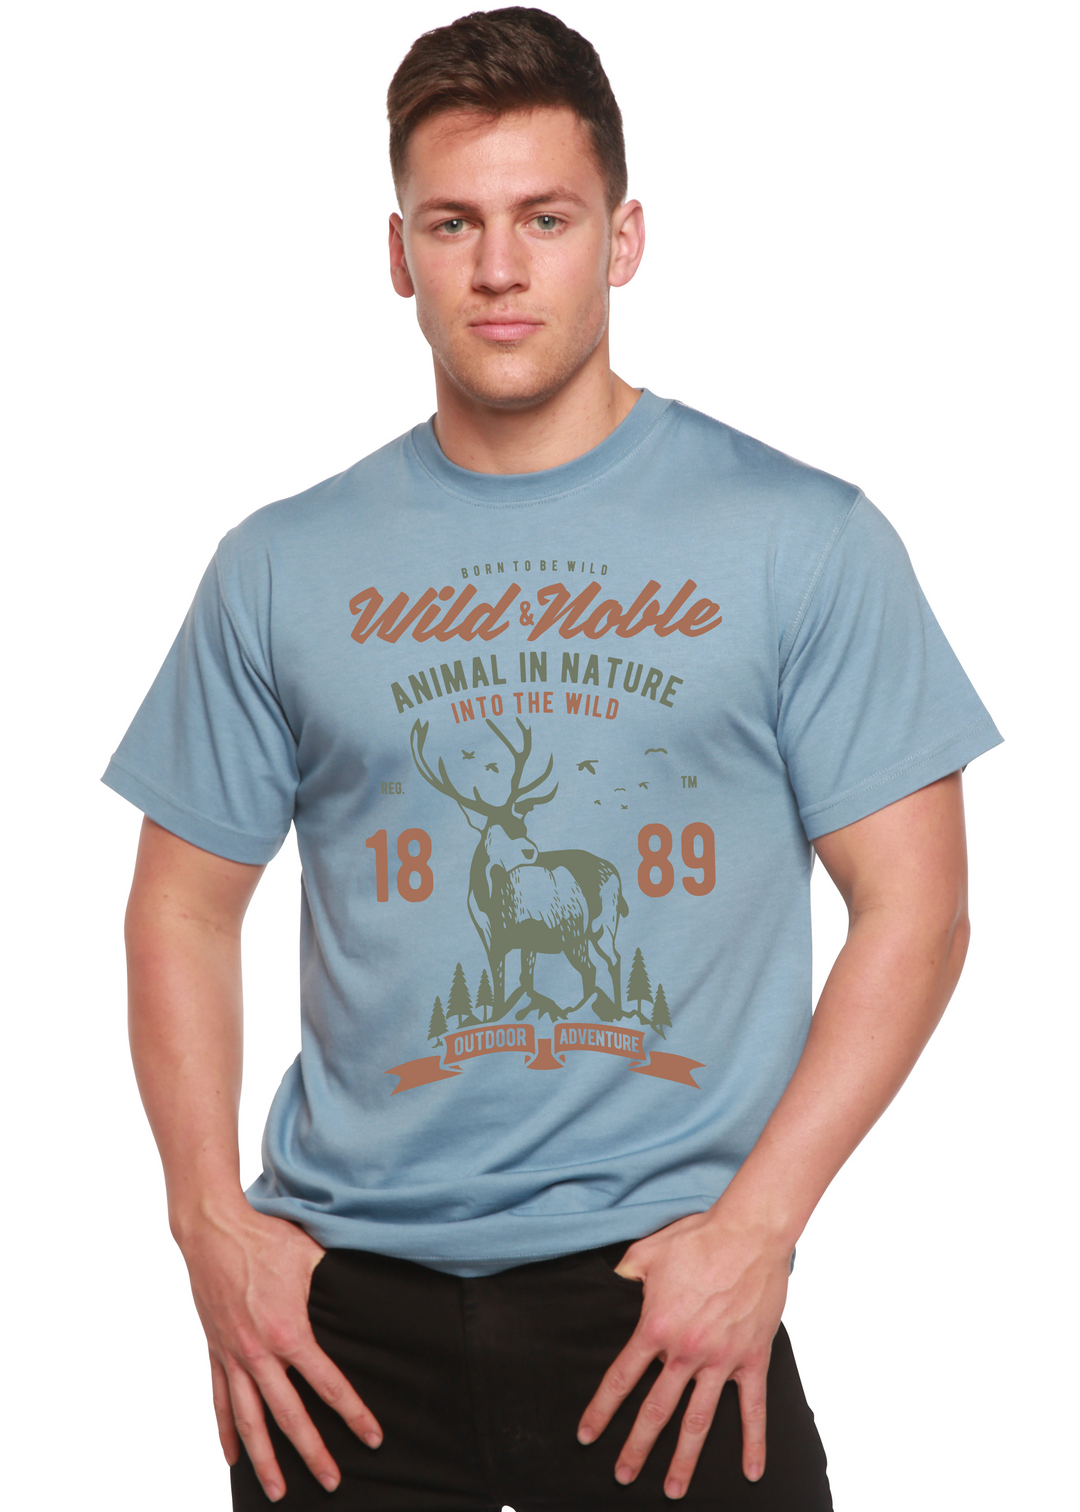 Wild And Noble men's bamboo tshirt infinity blue